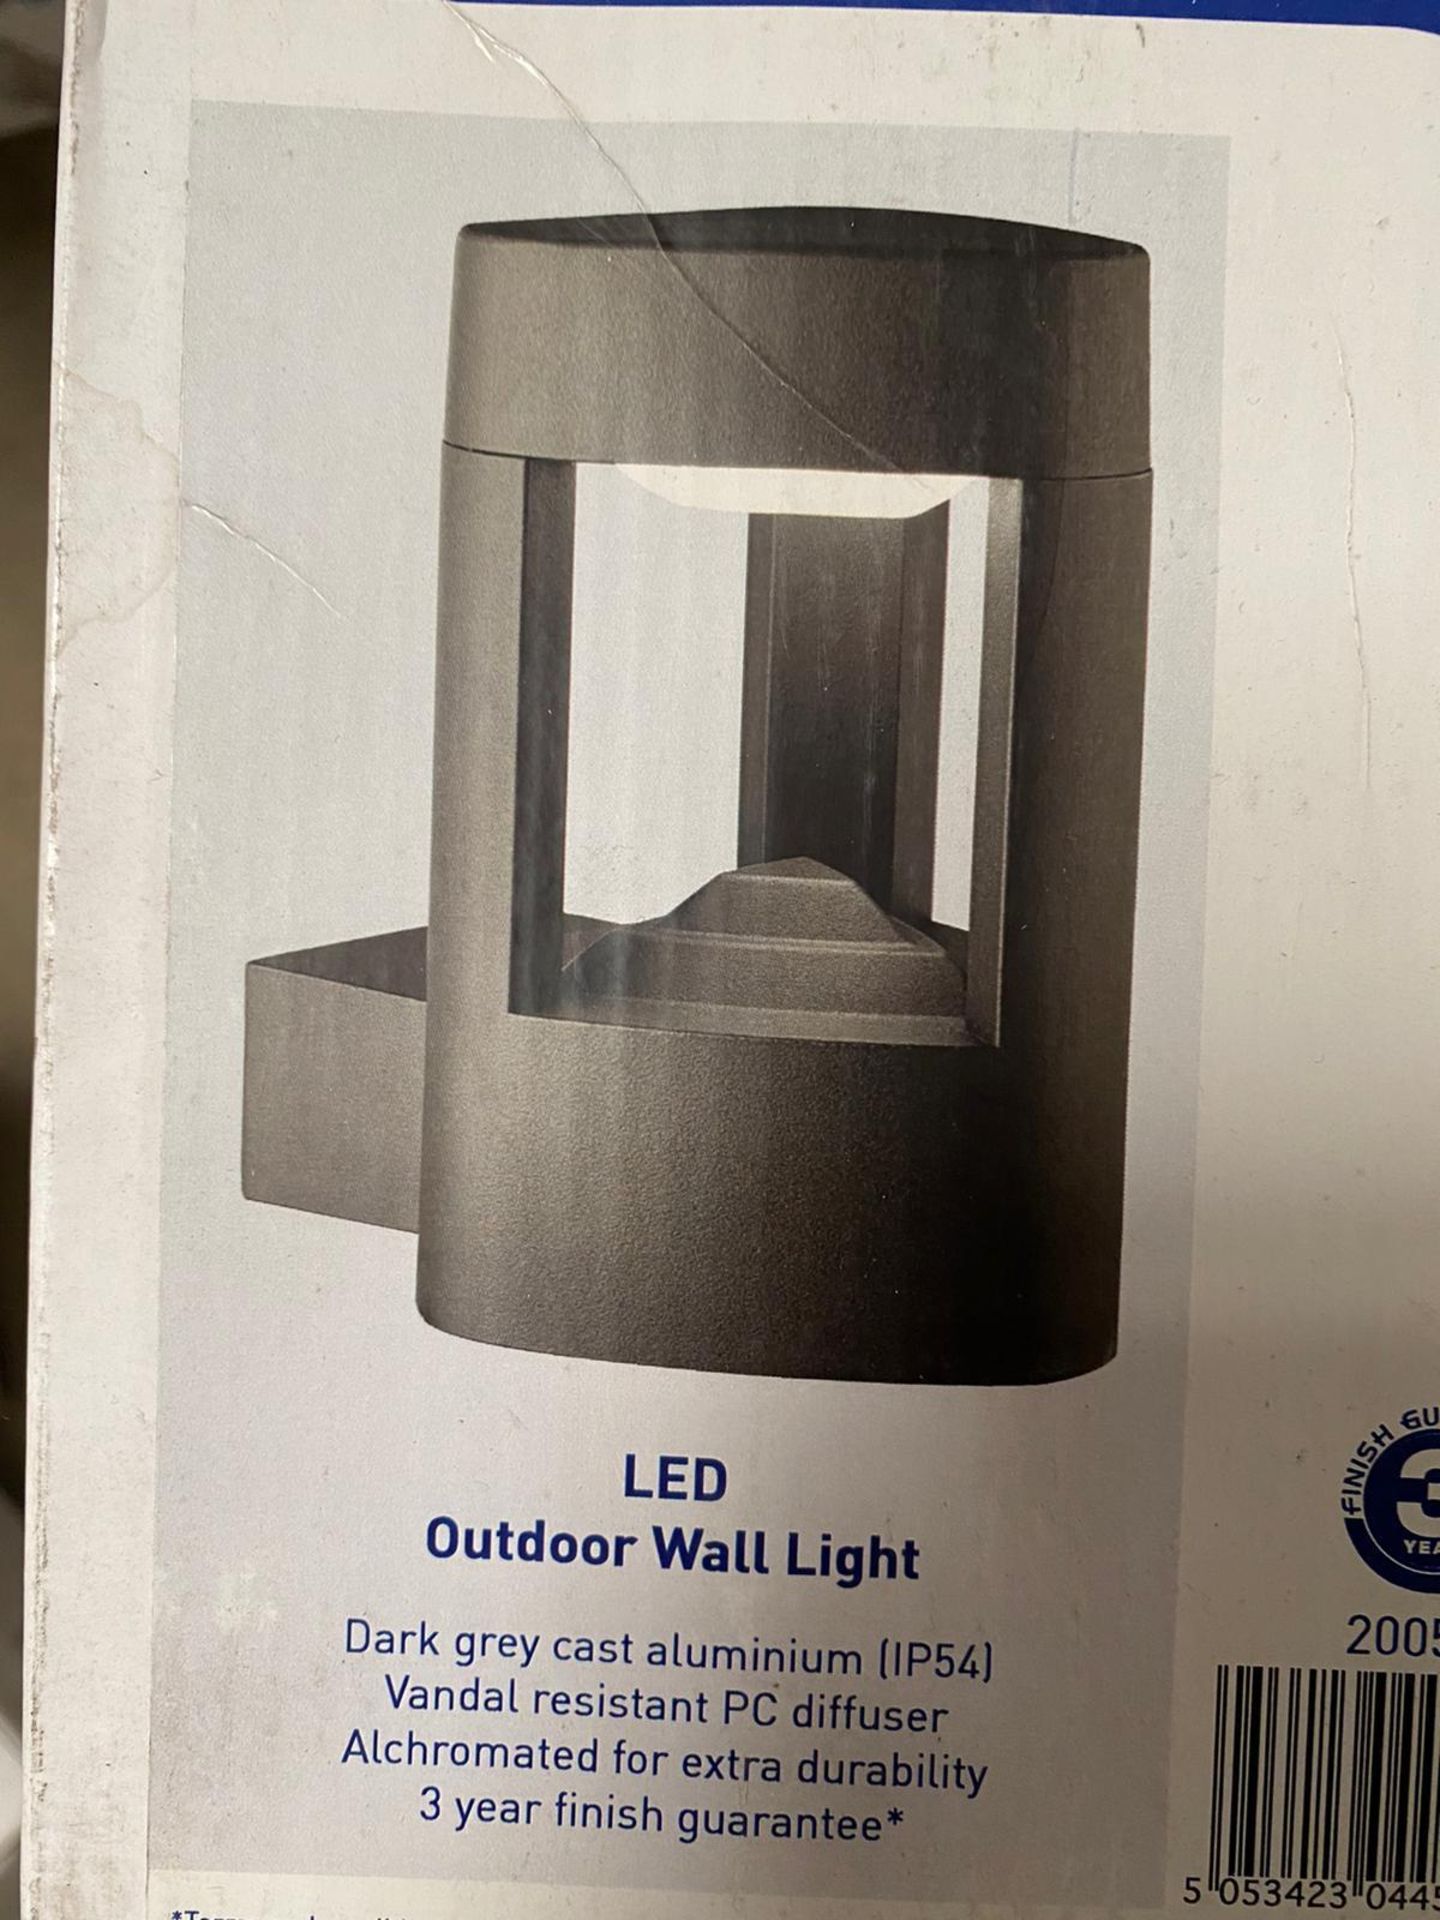 1 x Searchlight LED Outfoor Wall Light in dark grey - Ref: 2005GY - new and Boxed - RRP: £75.00 - Image 2 of 4